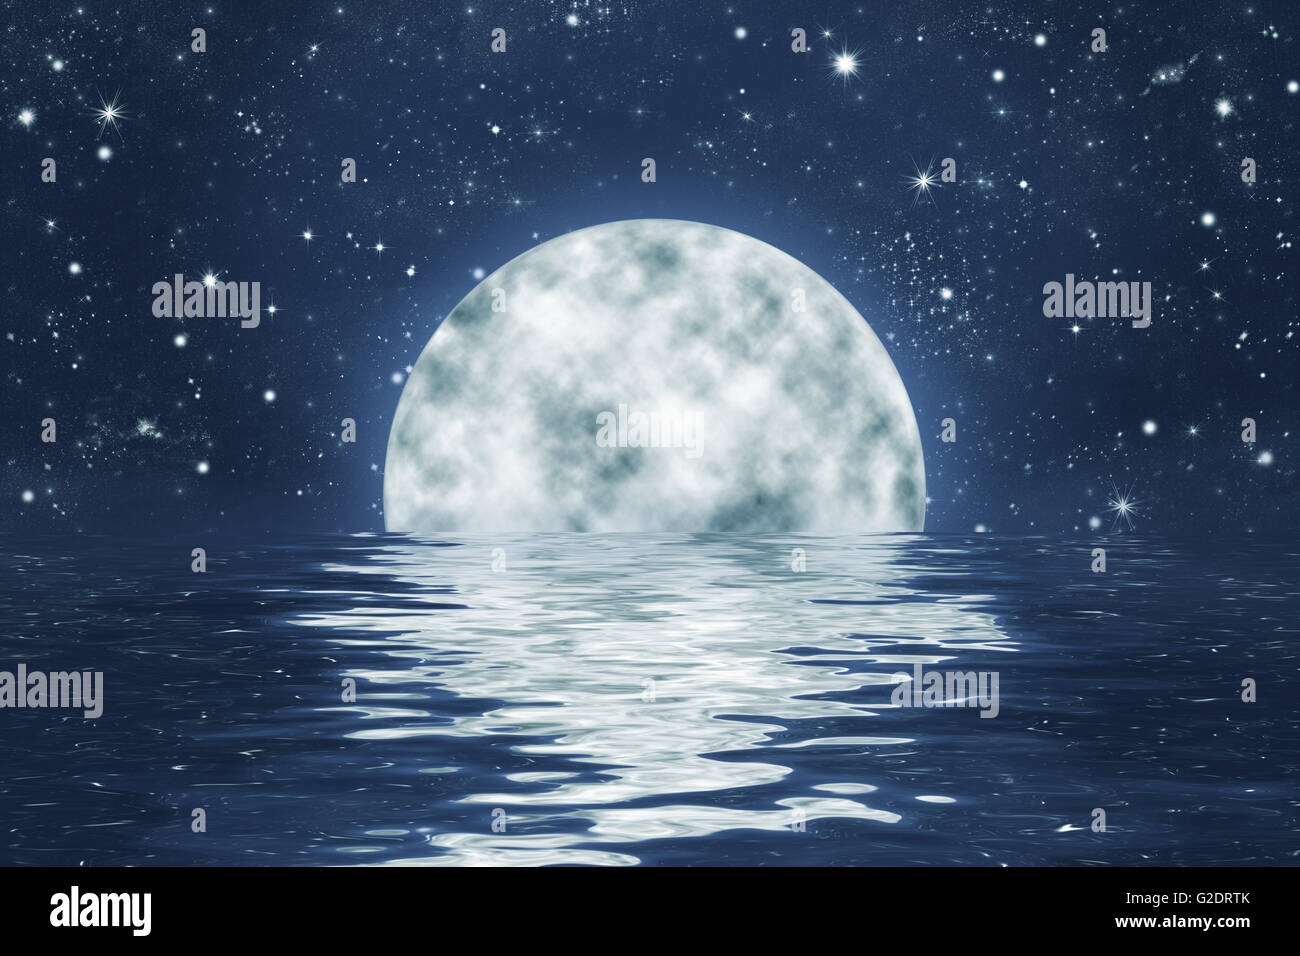 Moon Set Over Water With Waves With Full Moon On Blue Night Sky With Stock Photo Alamy